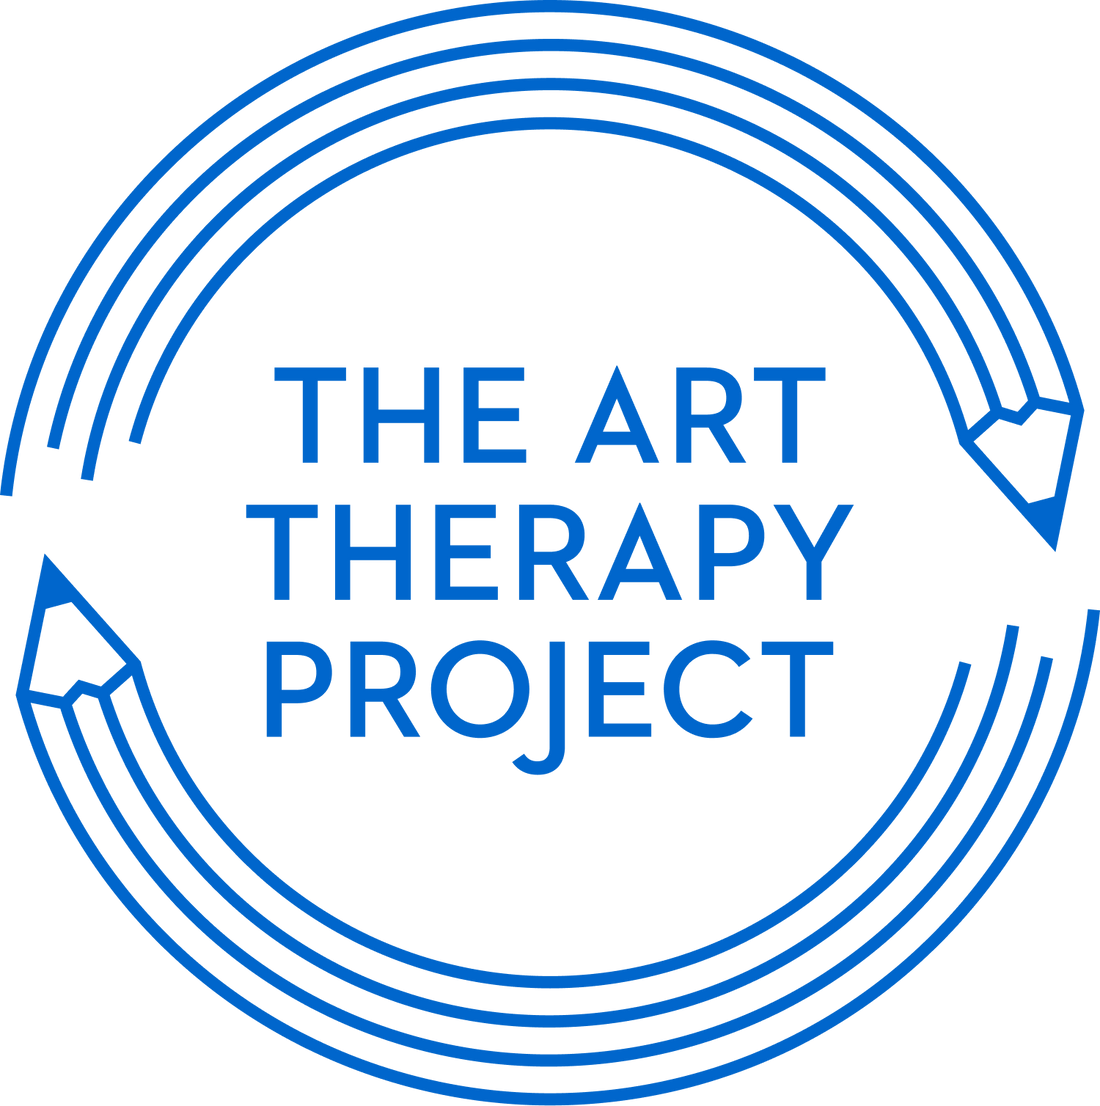 THROUGH OUR JOINT EFFORTS, UNITY RESIN & "THE ART THERAPY PROJECT" WILL ENABLE THOSE SUFFERING FROM MENTAL ILLNESS TO HAVE FREE ACCESS TO ART THERAPY!